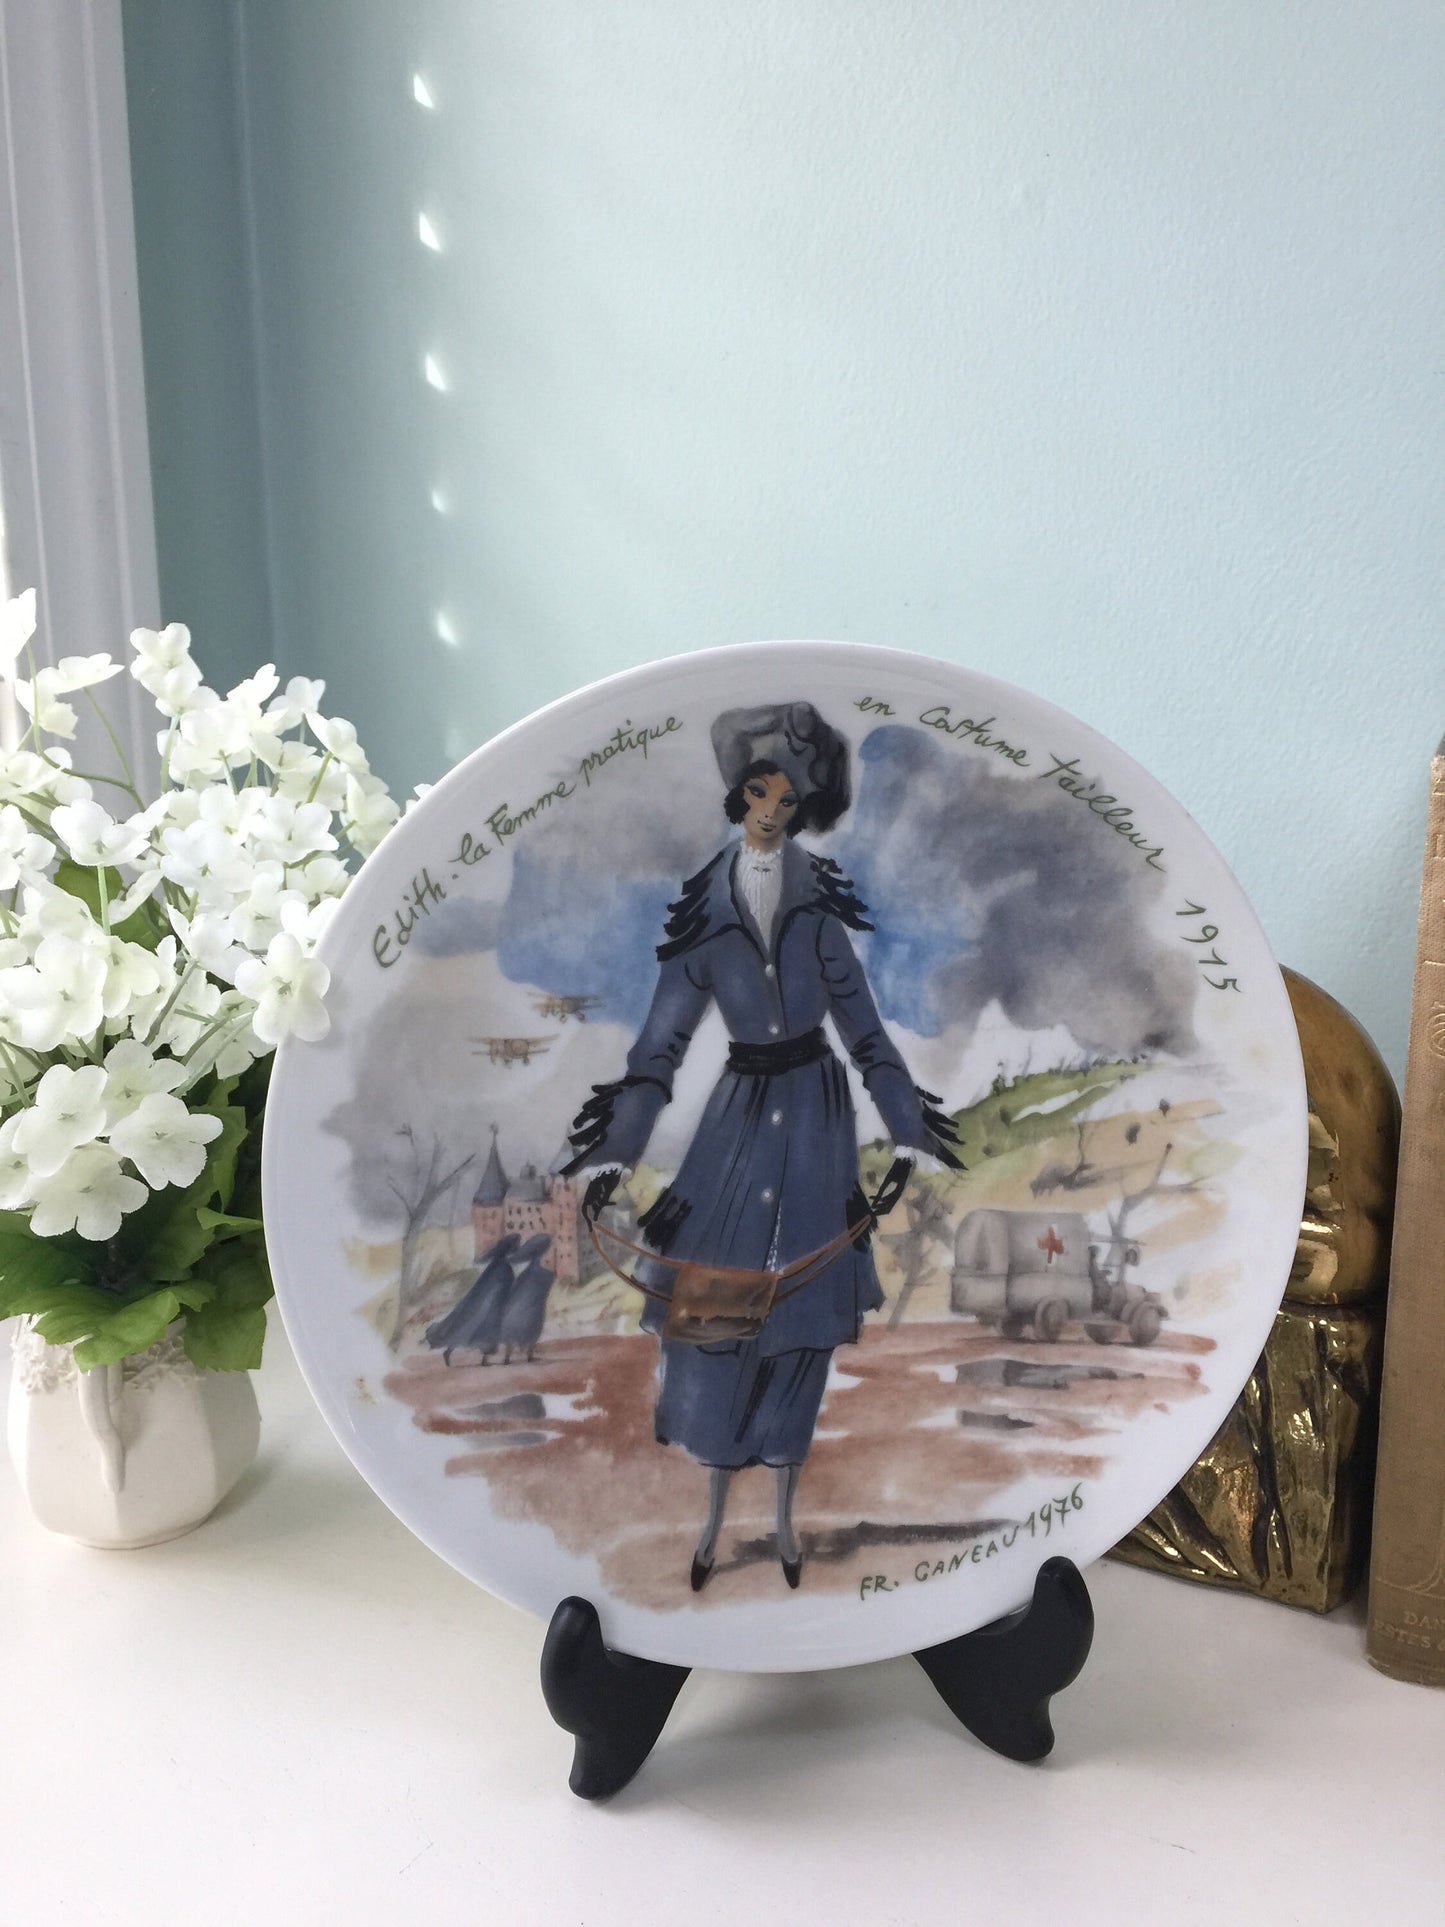 Vintage Limoges French Plate, 1976 Collectible Plate, Women of the Century, FR Ganeau, Edith la Femme Matique - Duckwells